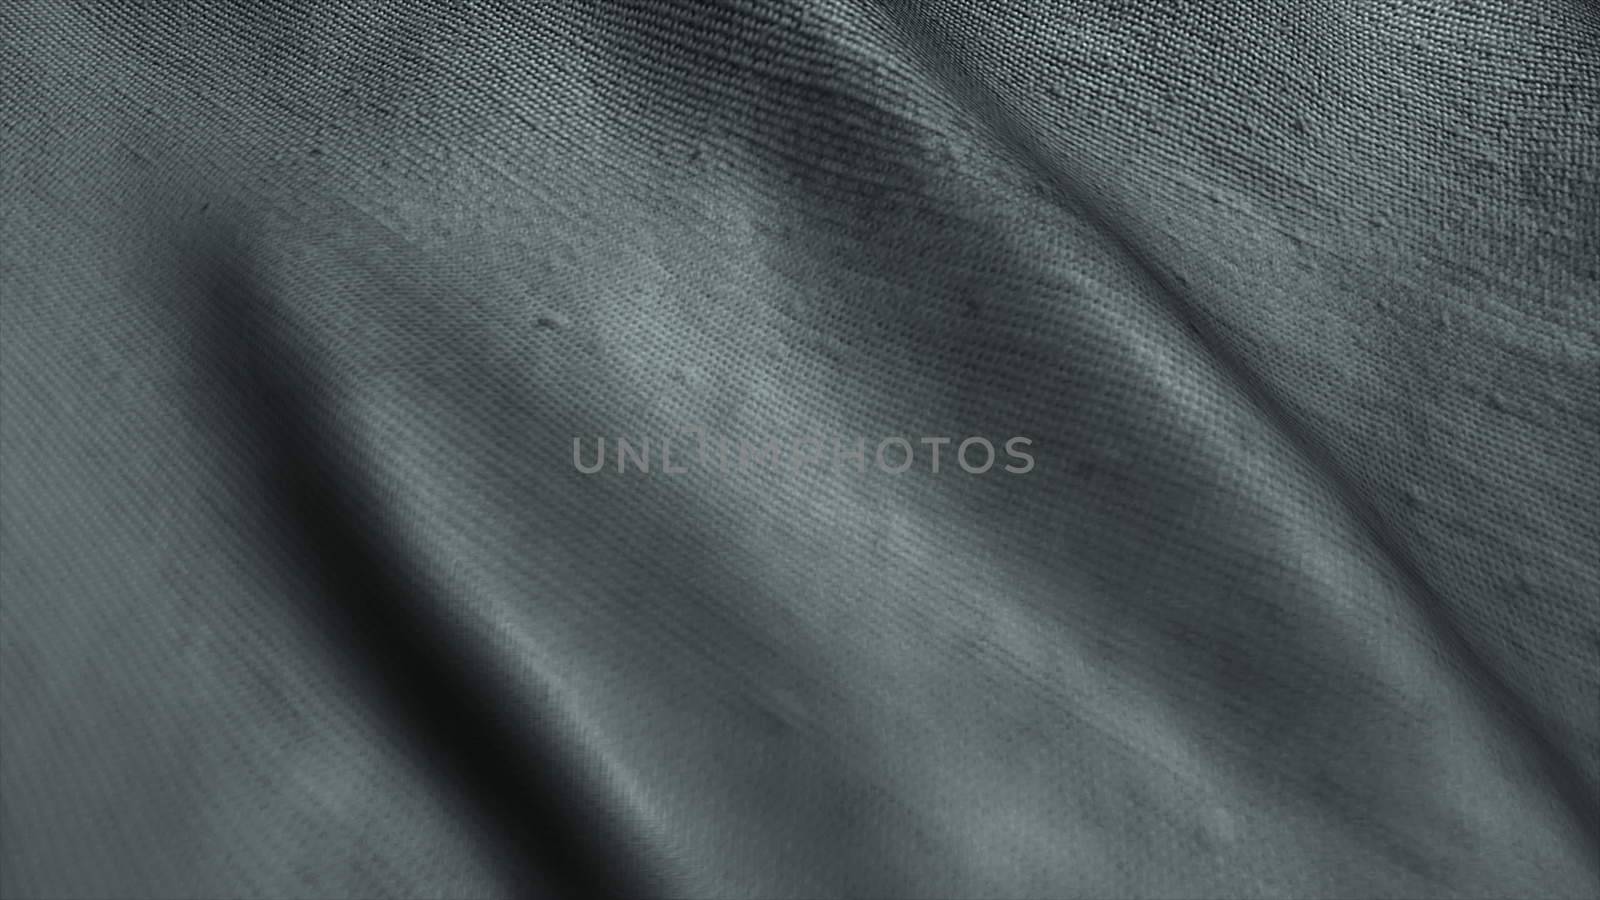 Neutral gray fabric background waving in the wind. Easy to colorize to any color desired.